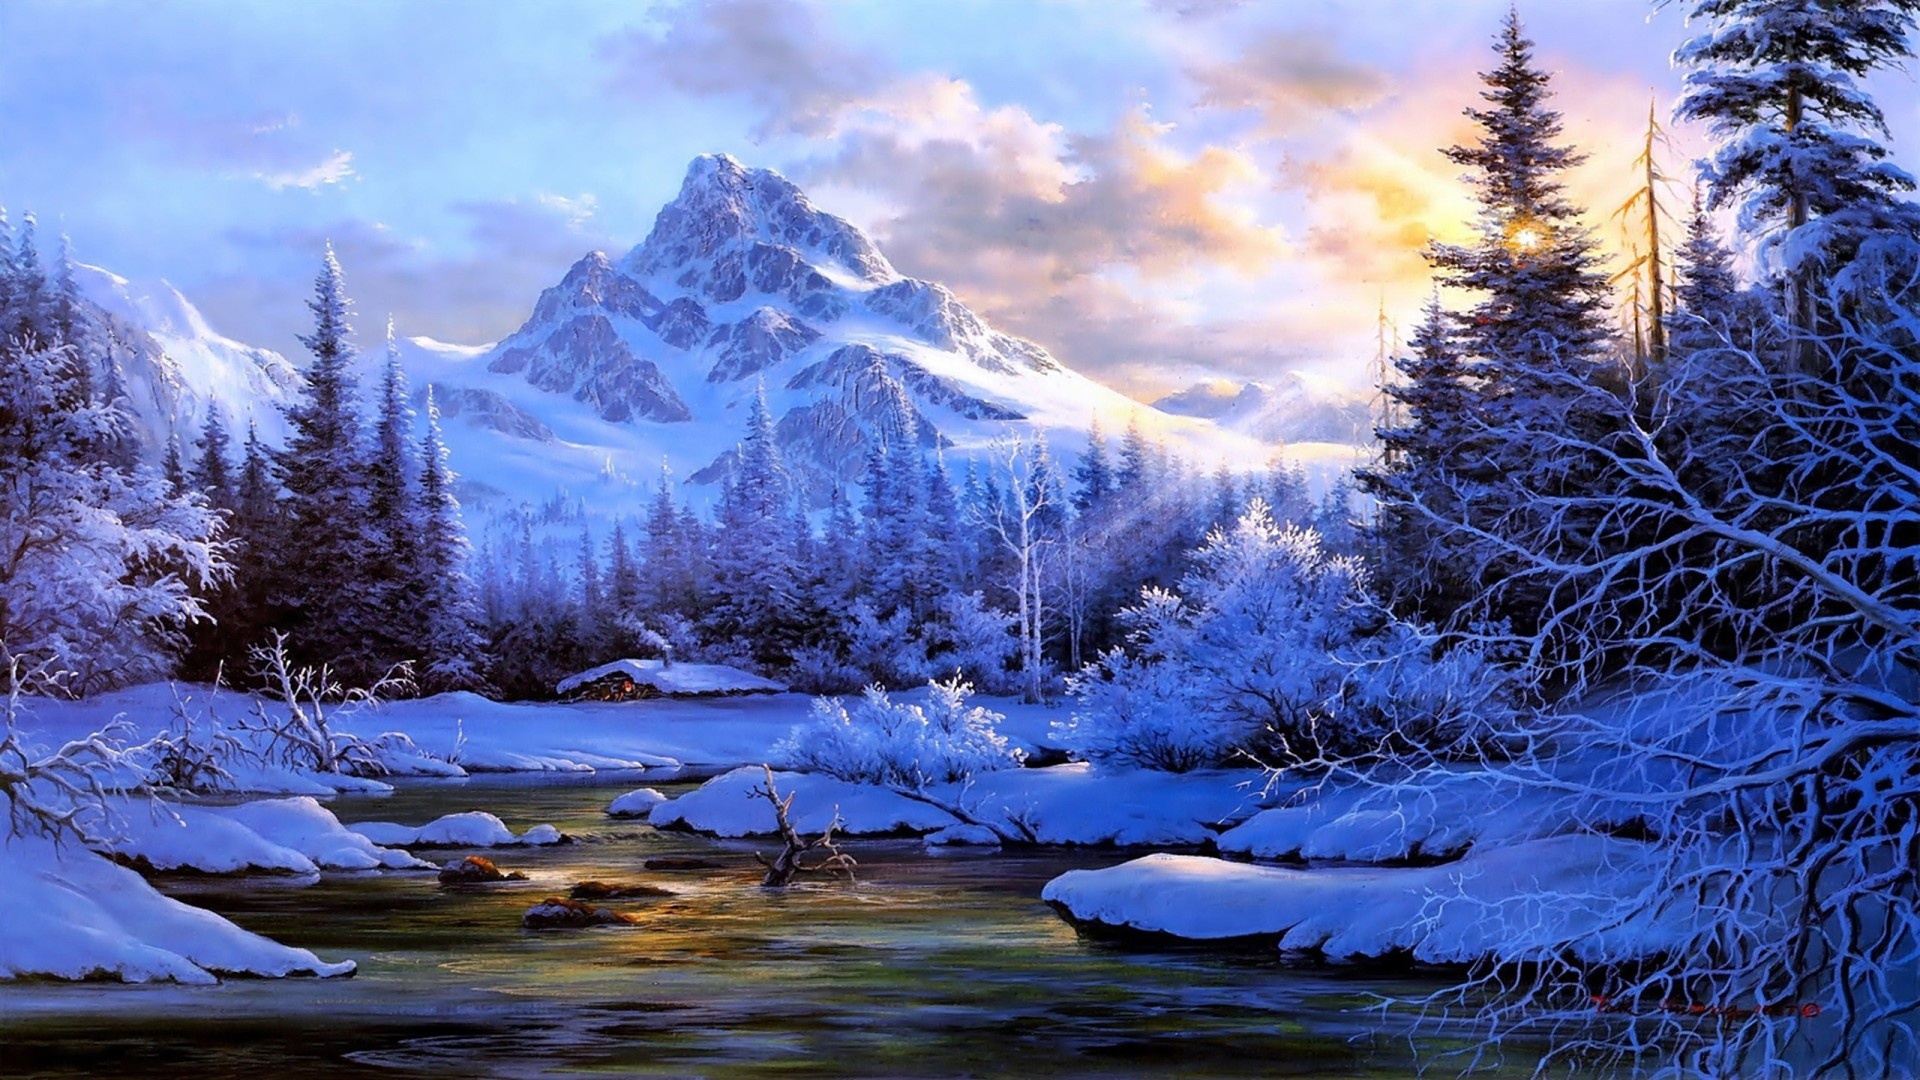 Landscape: The mountain valley winter art drawn in Chinese style, Snowy peaks and alpine conifer forest. 1920x1080 Full HD Background.